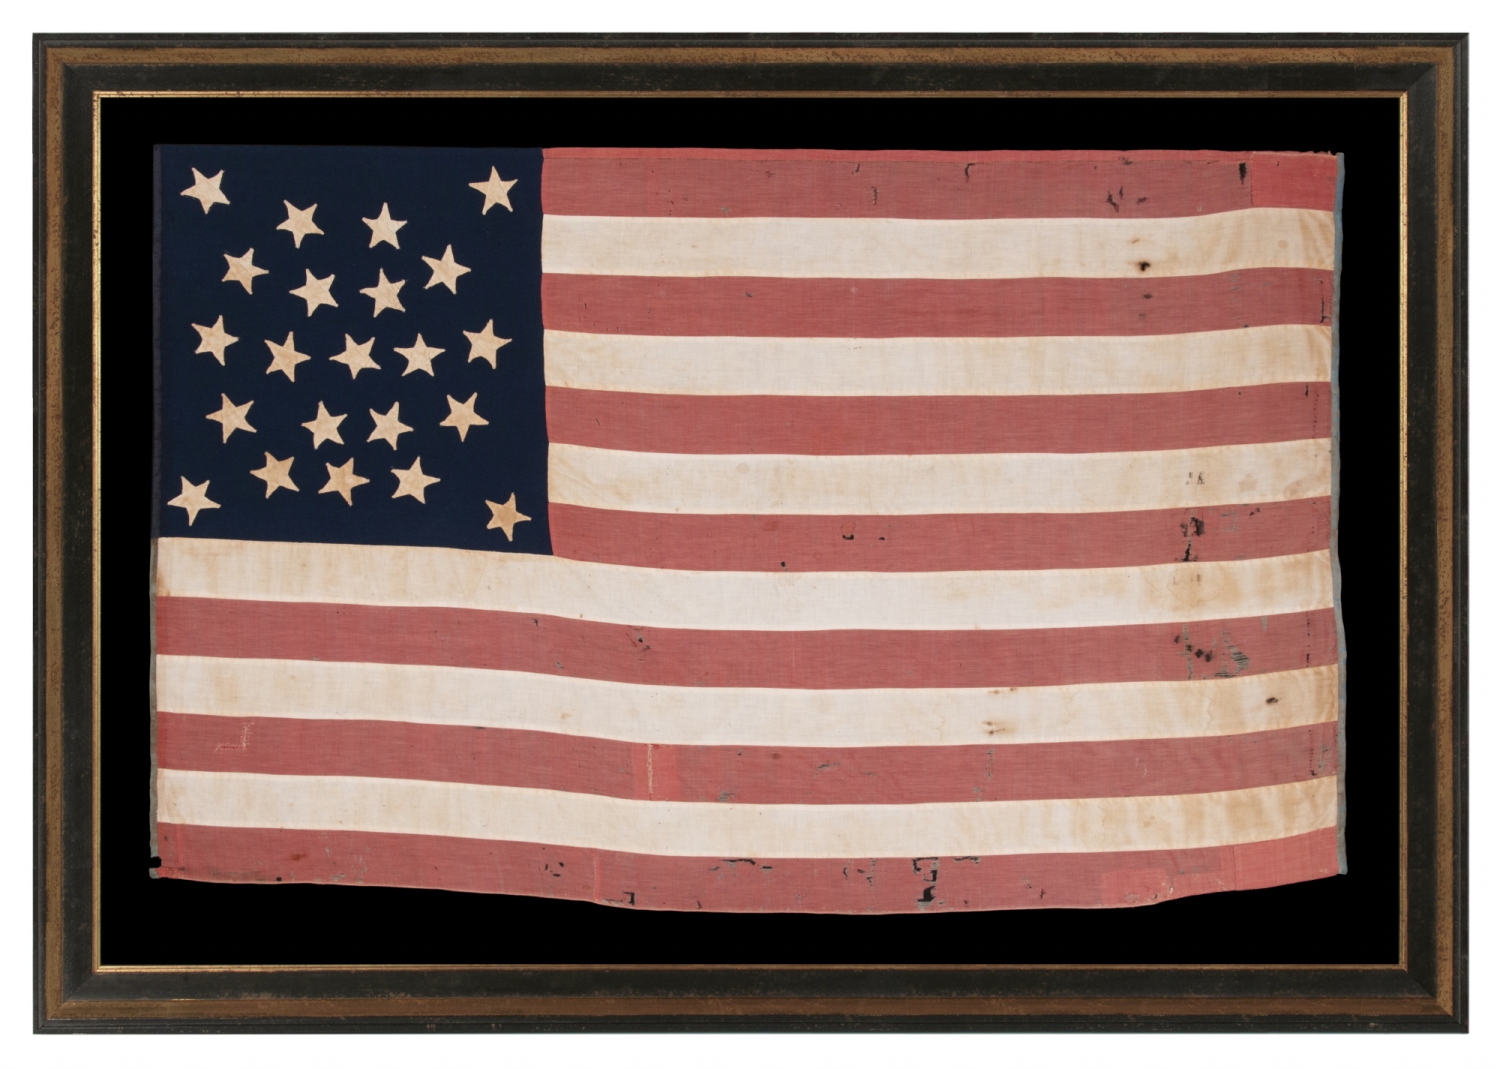 22 STAR ANTIQUE AMERICAN FLAG OF THE CIVIL WAR ERA; A SOUTHERN-EXCLUSIONARY COUNT ARRANGED IN A DOUBLE-WREATH MEDALLION CONFIGURATION; HOMEMADE OF WOOL AND COTTON; A RARE STAR COUNT IN ANY PERIOD; EXHIBITED JUNE-SEPTEMBER, 2021 AT THE MUSEUM OF THE AMERICAN REVOLUTION